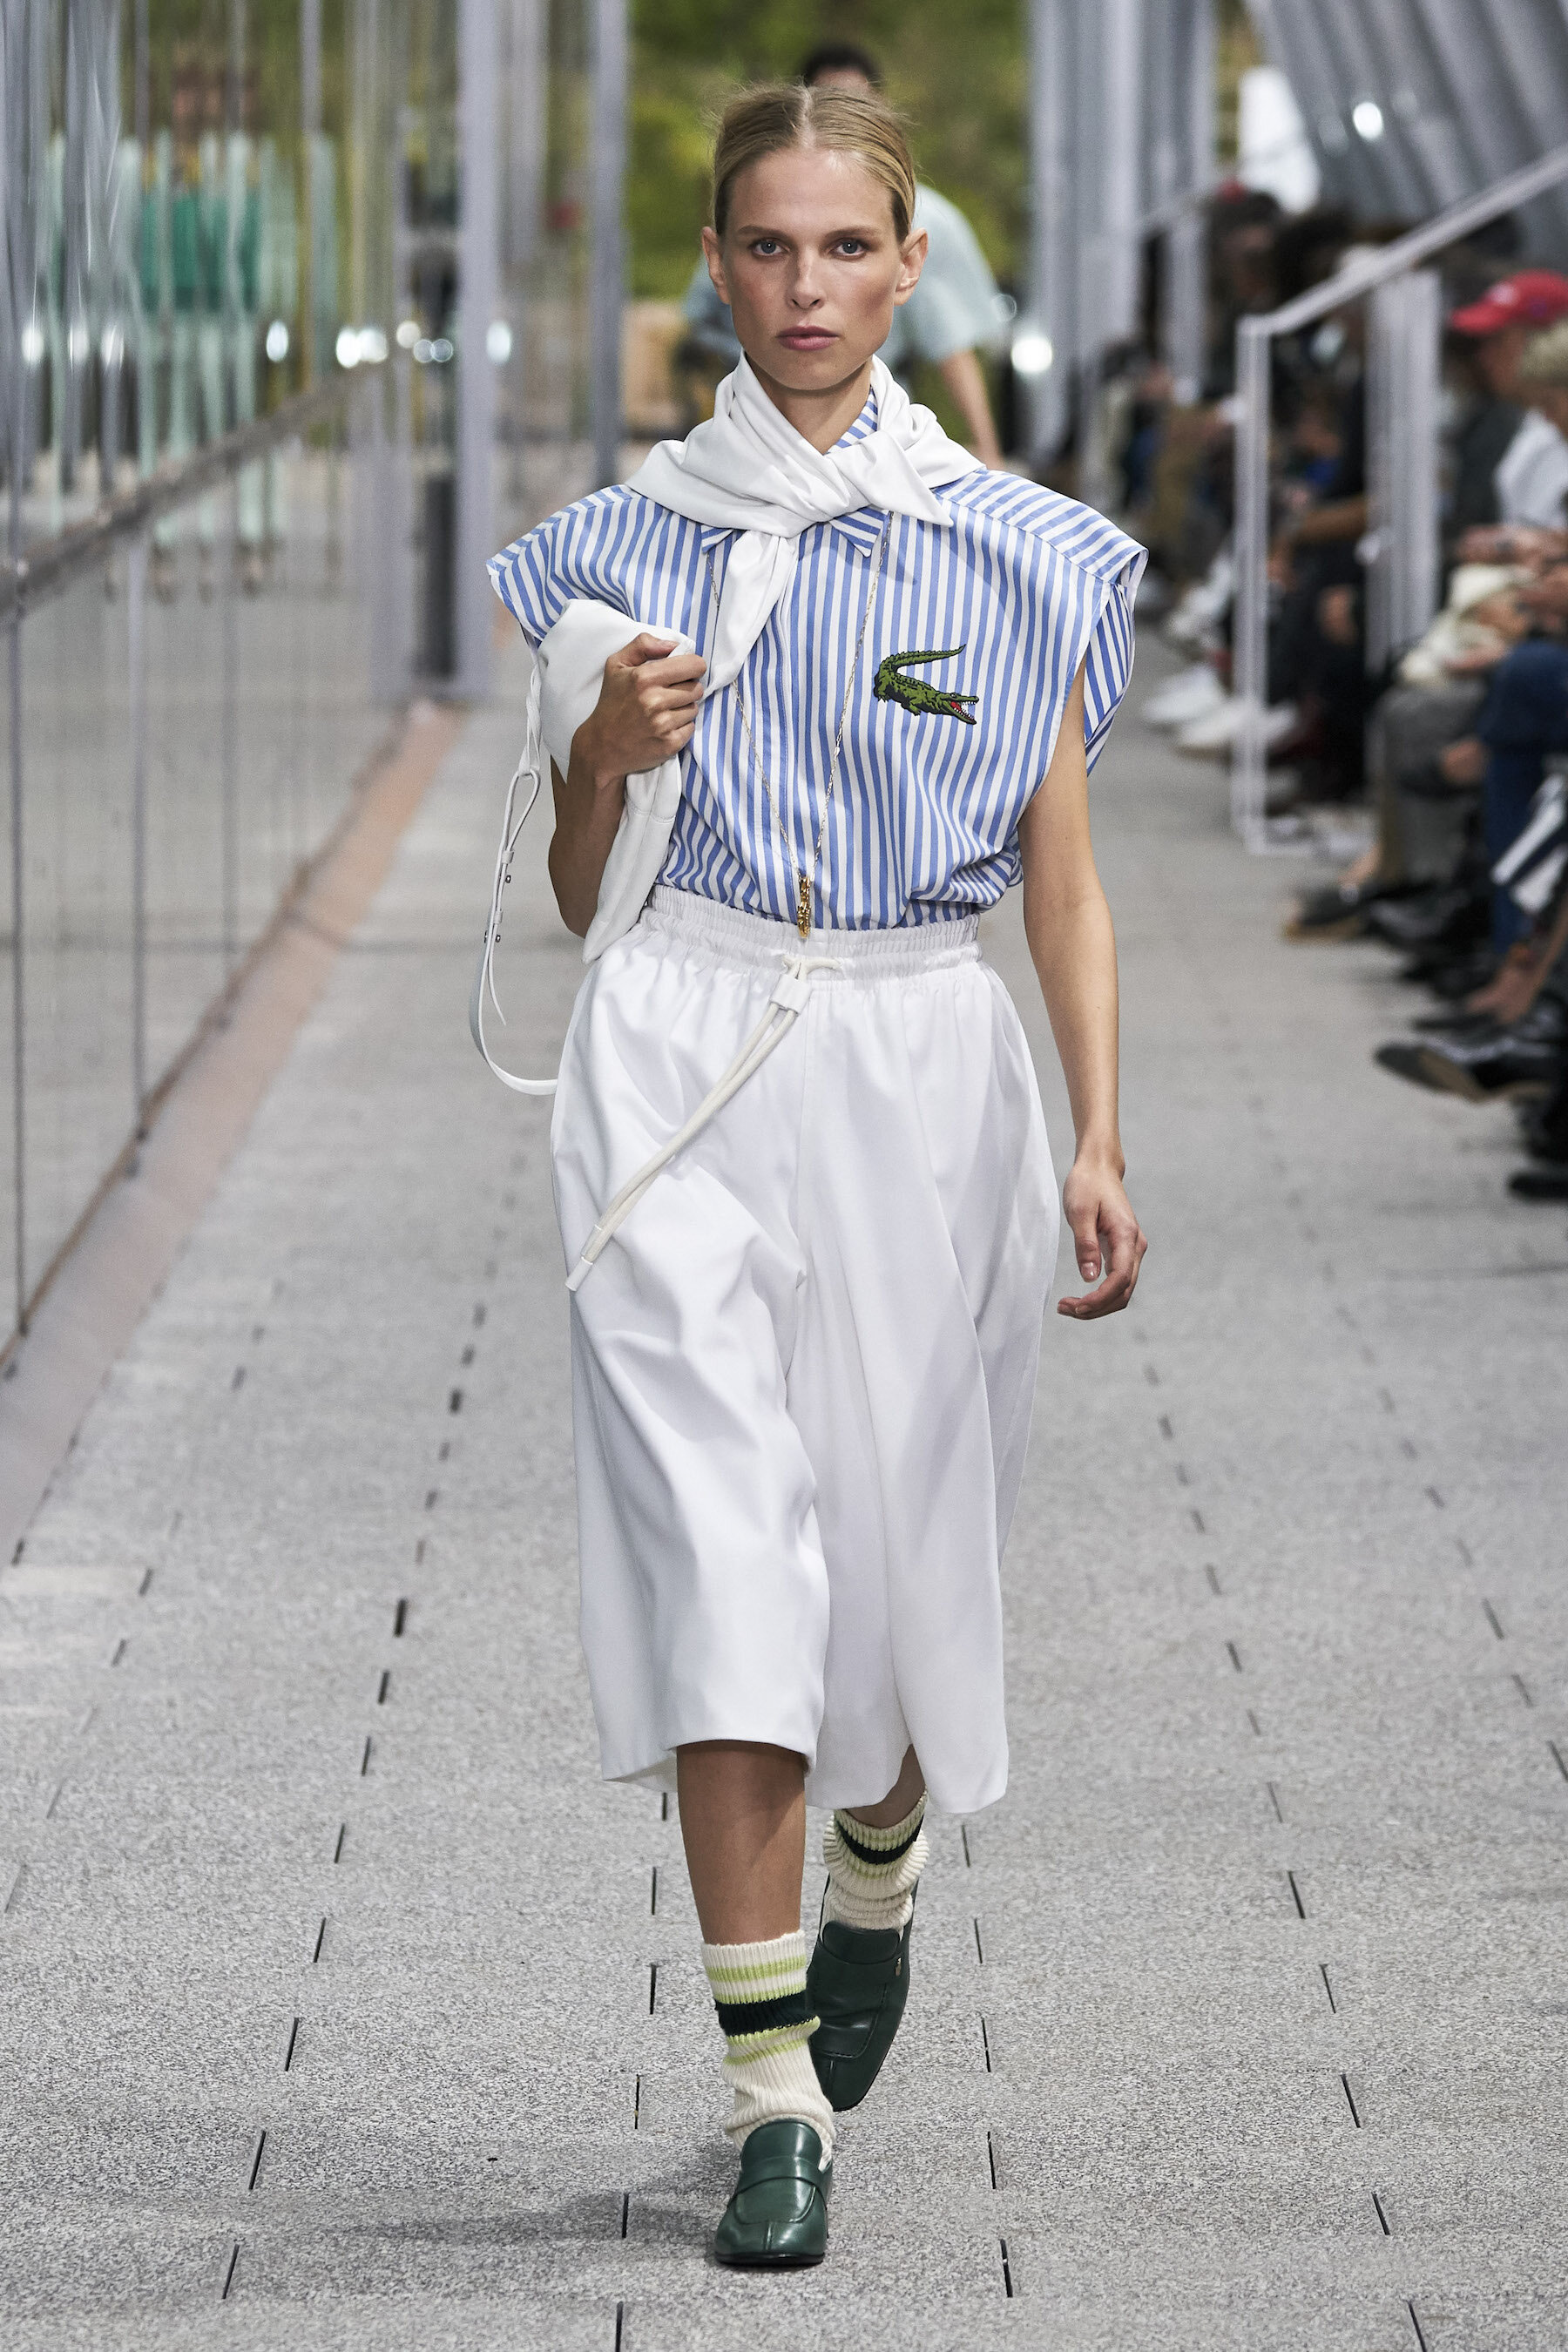 Lacoste SS20_LOOK 29 by Alessandro Lucioni  Imaxtree.com.jpg